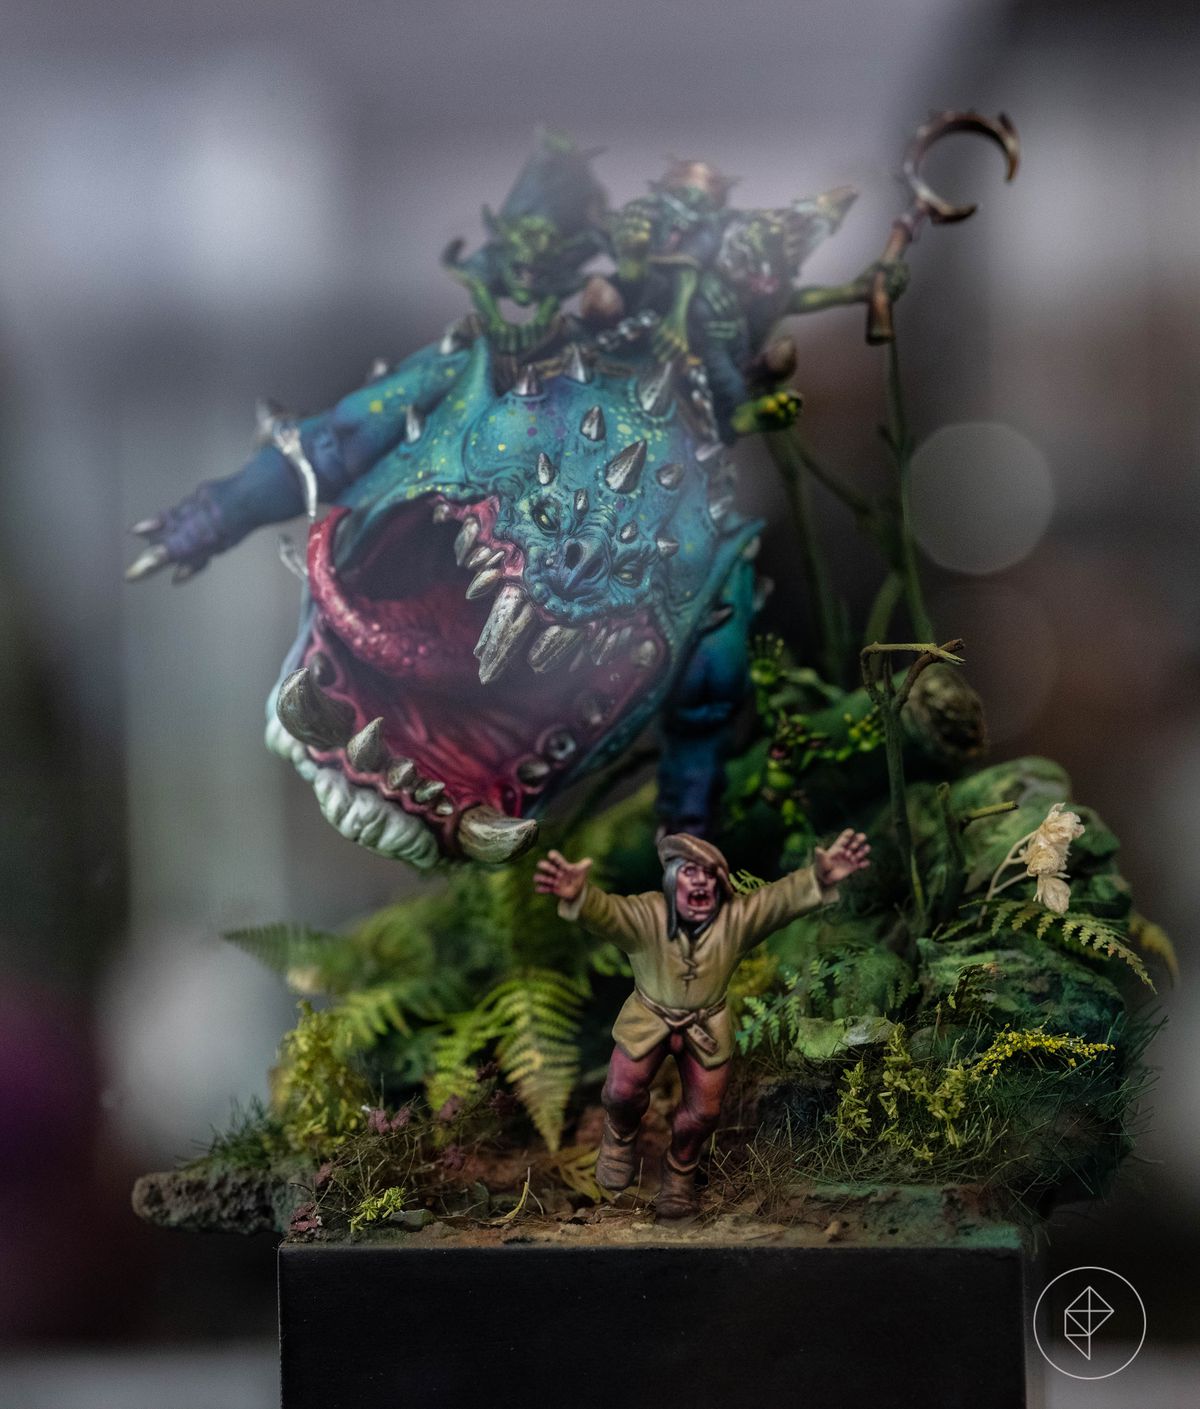 A giant squig — a two-legged, rolly-polly fantasy creature with a massive jaw and a lolling tongue — rampages through the underbrush, chasing a villager. The foliage is vibrant and realistic, with many different shapes and layers.